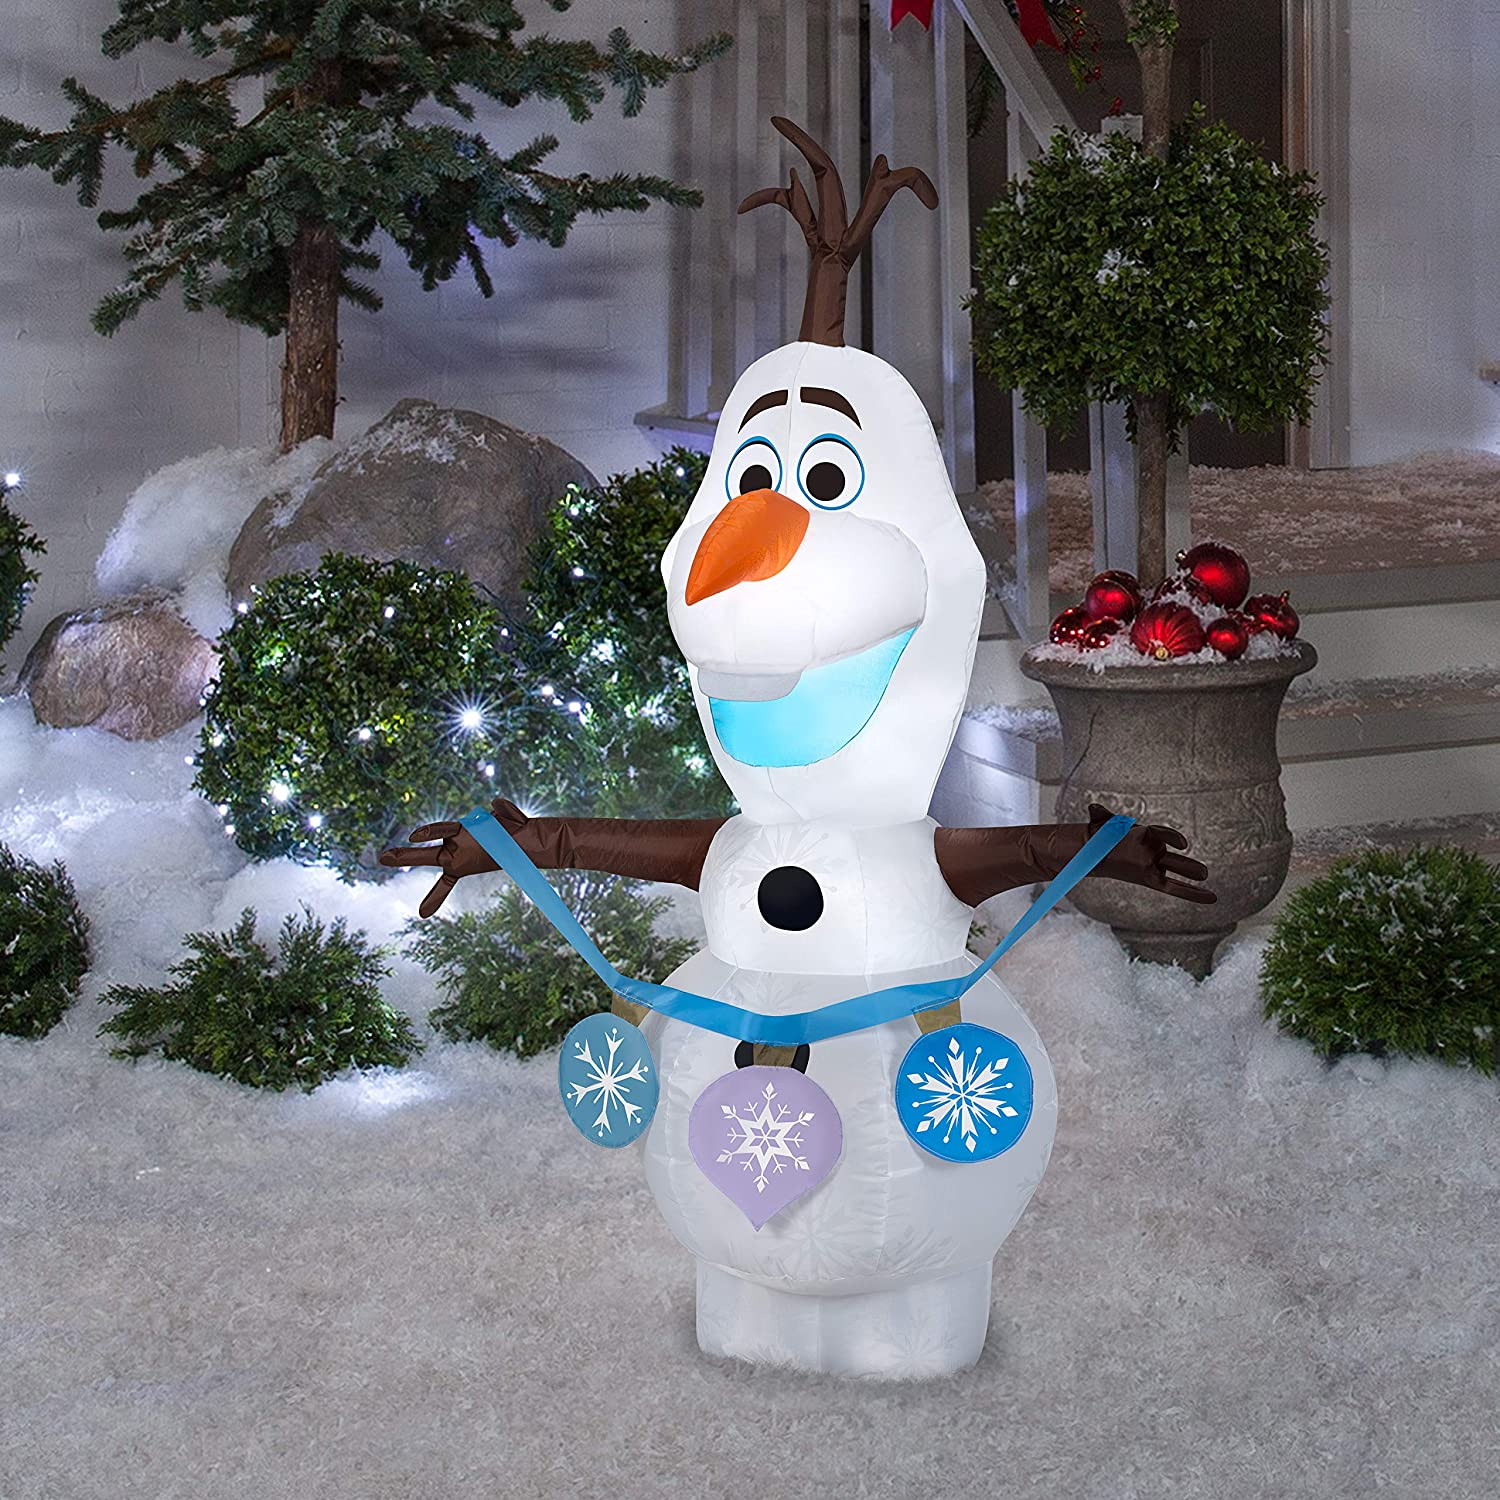 Tis Your Season | 4 Ft Airblown Inflatable Frozen 2 Olaf Holding String ...